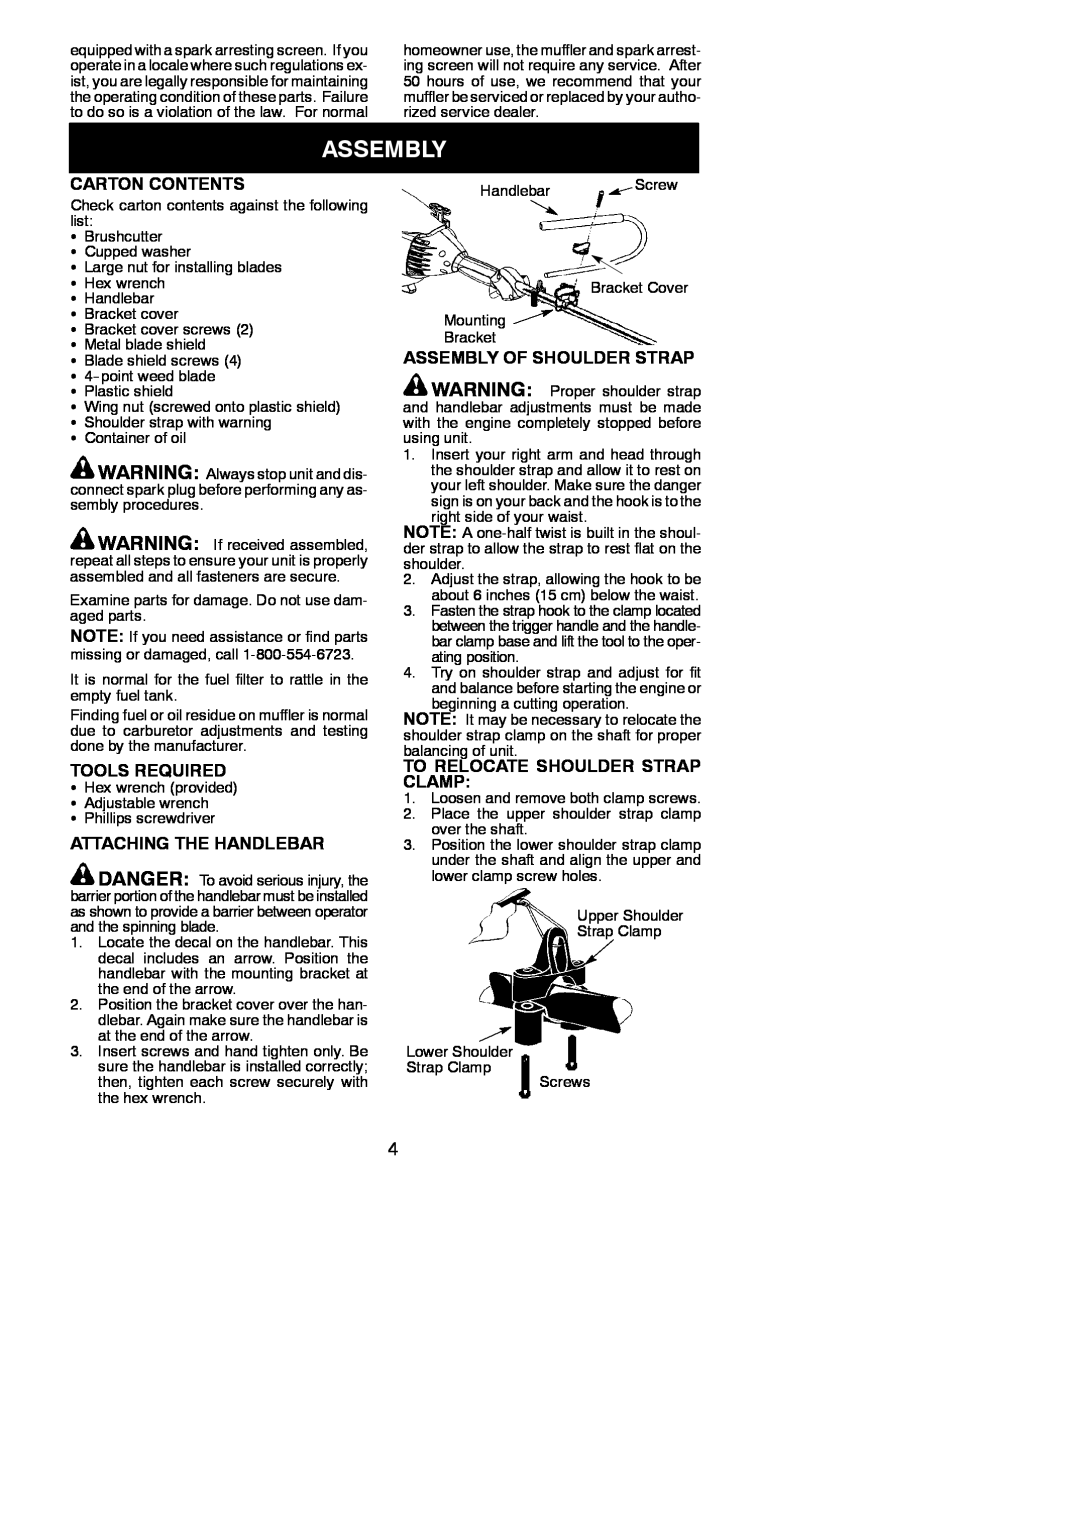 Poulan BC3150 instruction manual Carton Contents, Tools Required, Attaching The Handlebar, Assembly Of Shoulder Strap 